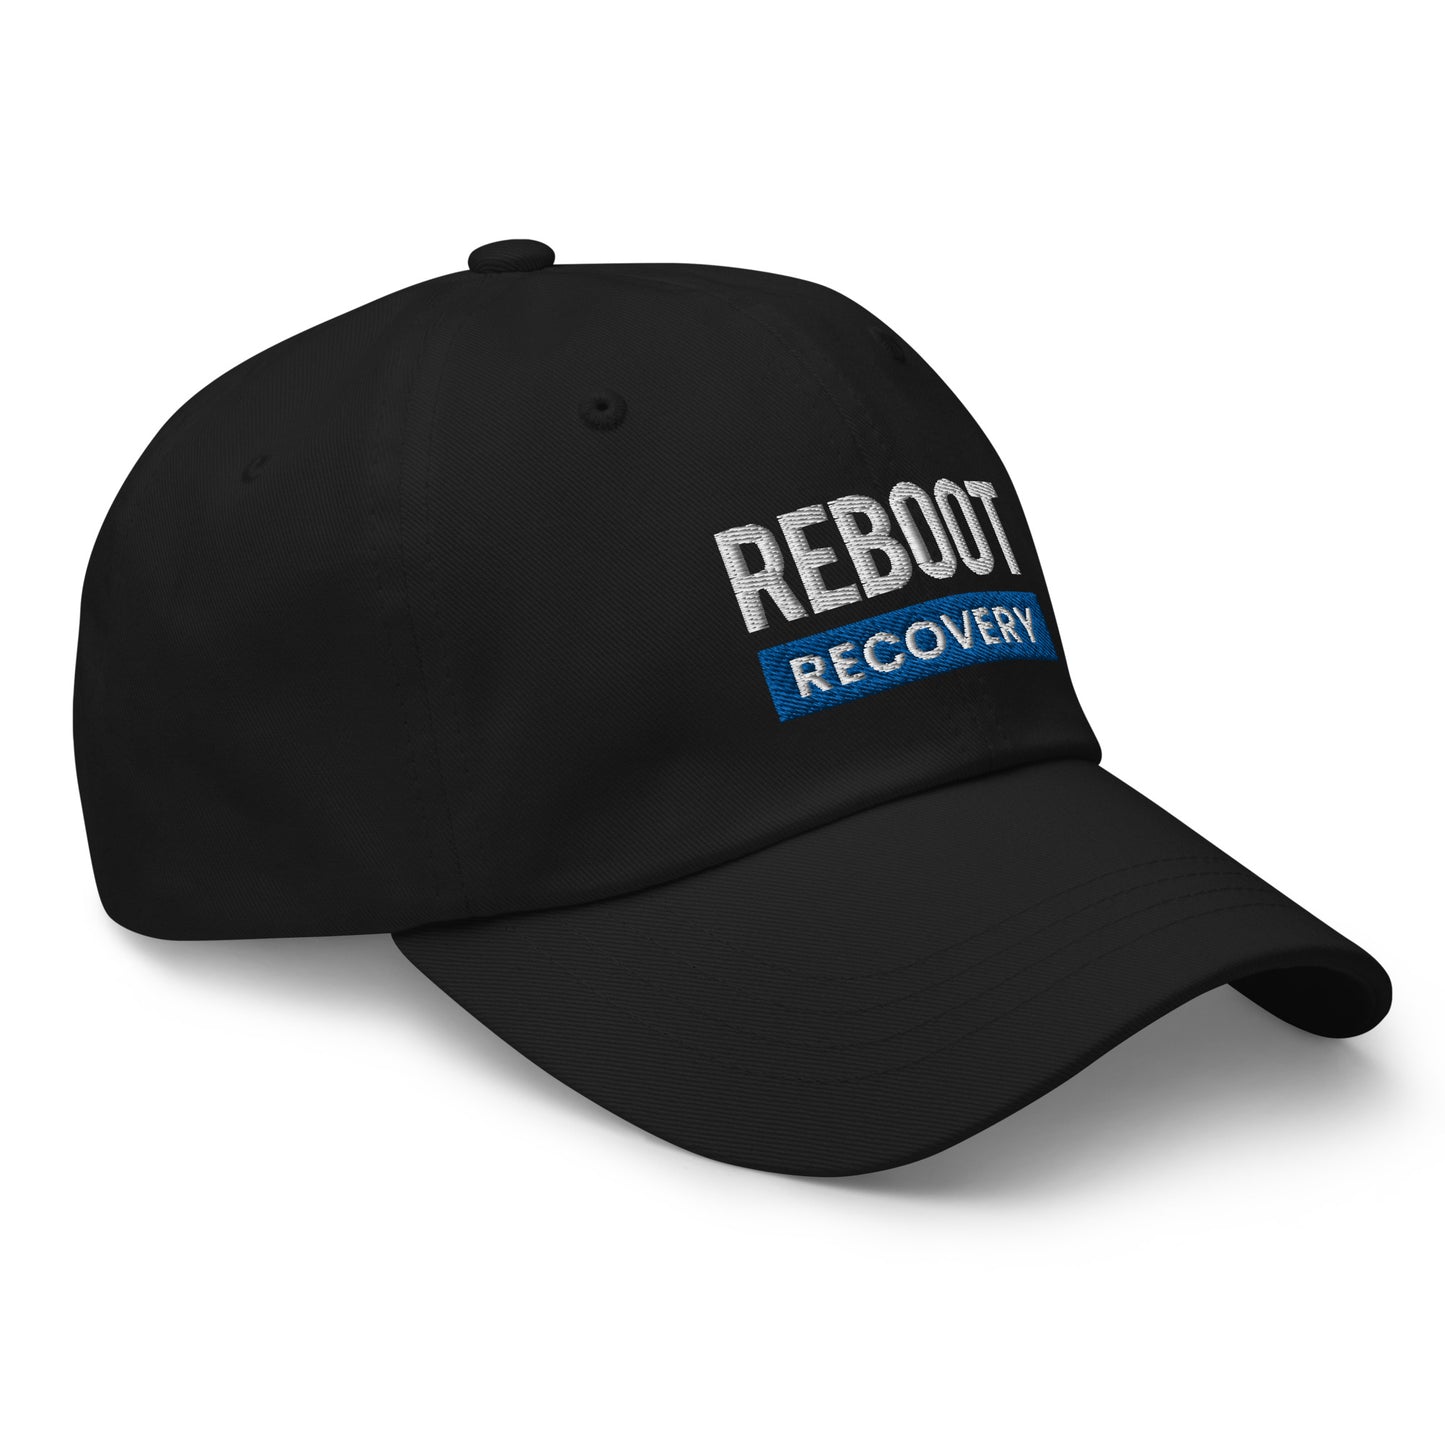 REBOOT Recovery Black Dad hat